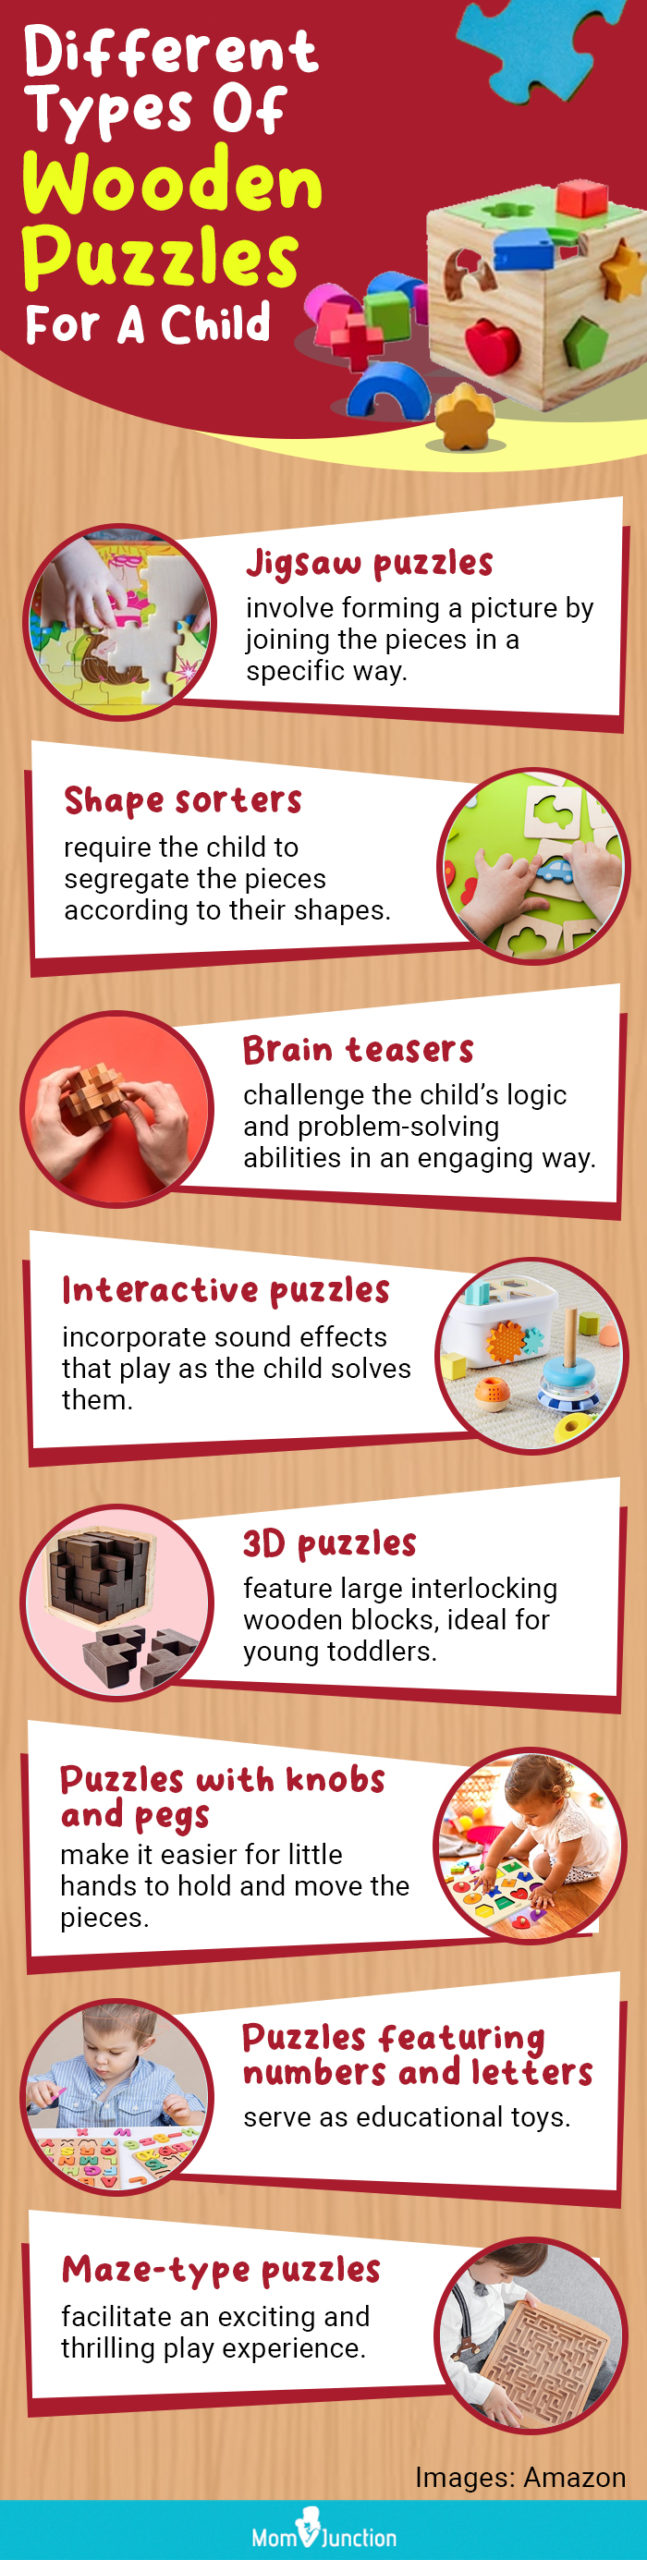 Different Types Of Wooden Puzzles For A Child (infographic)